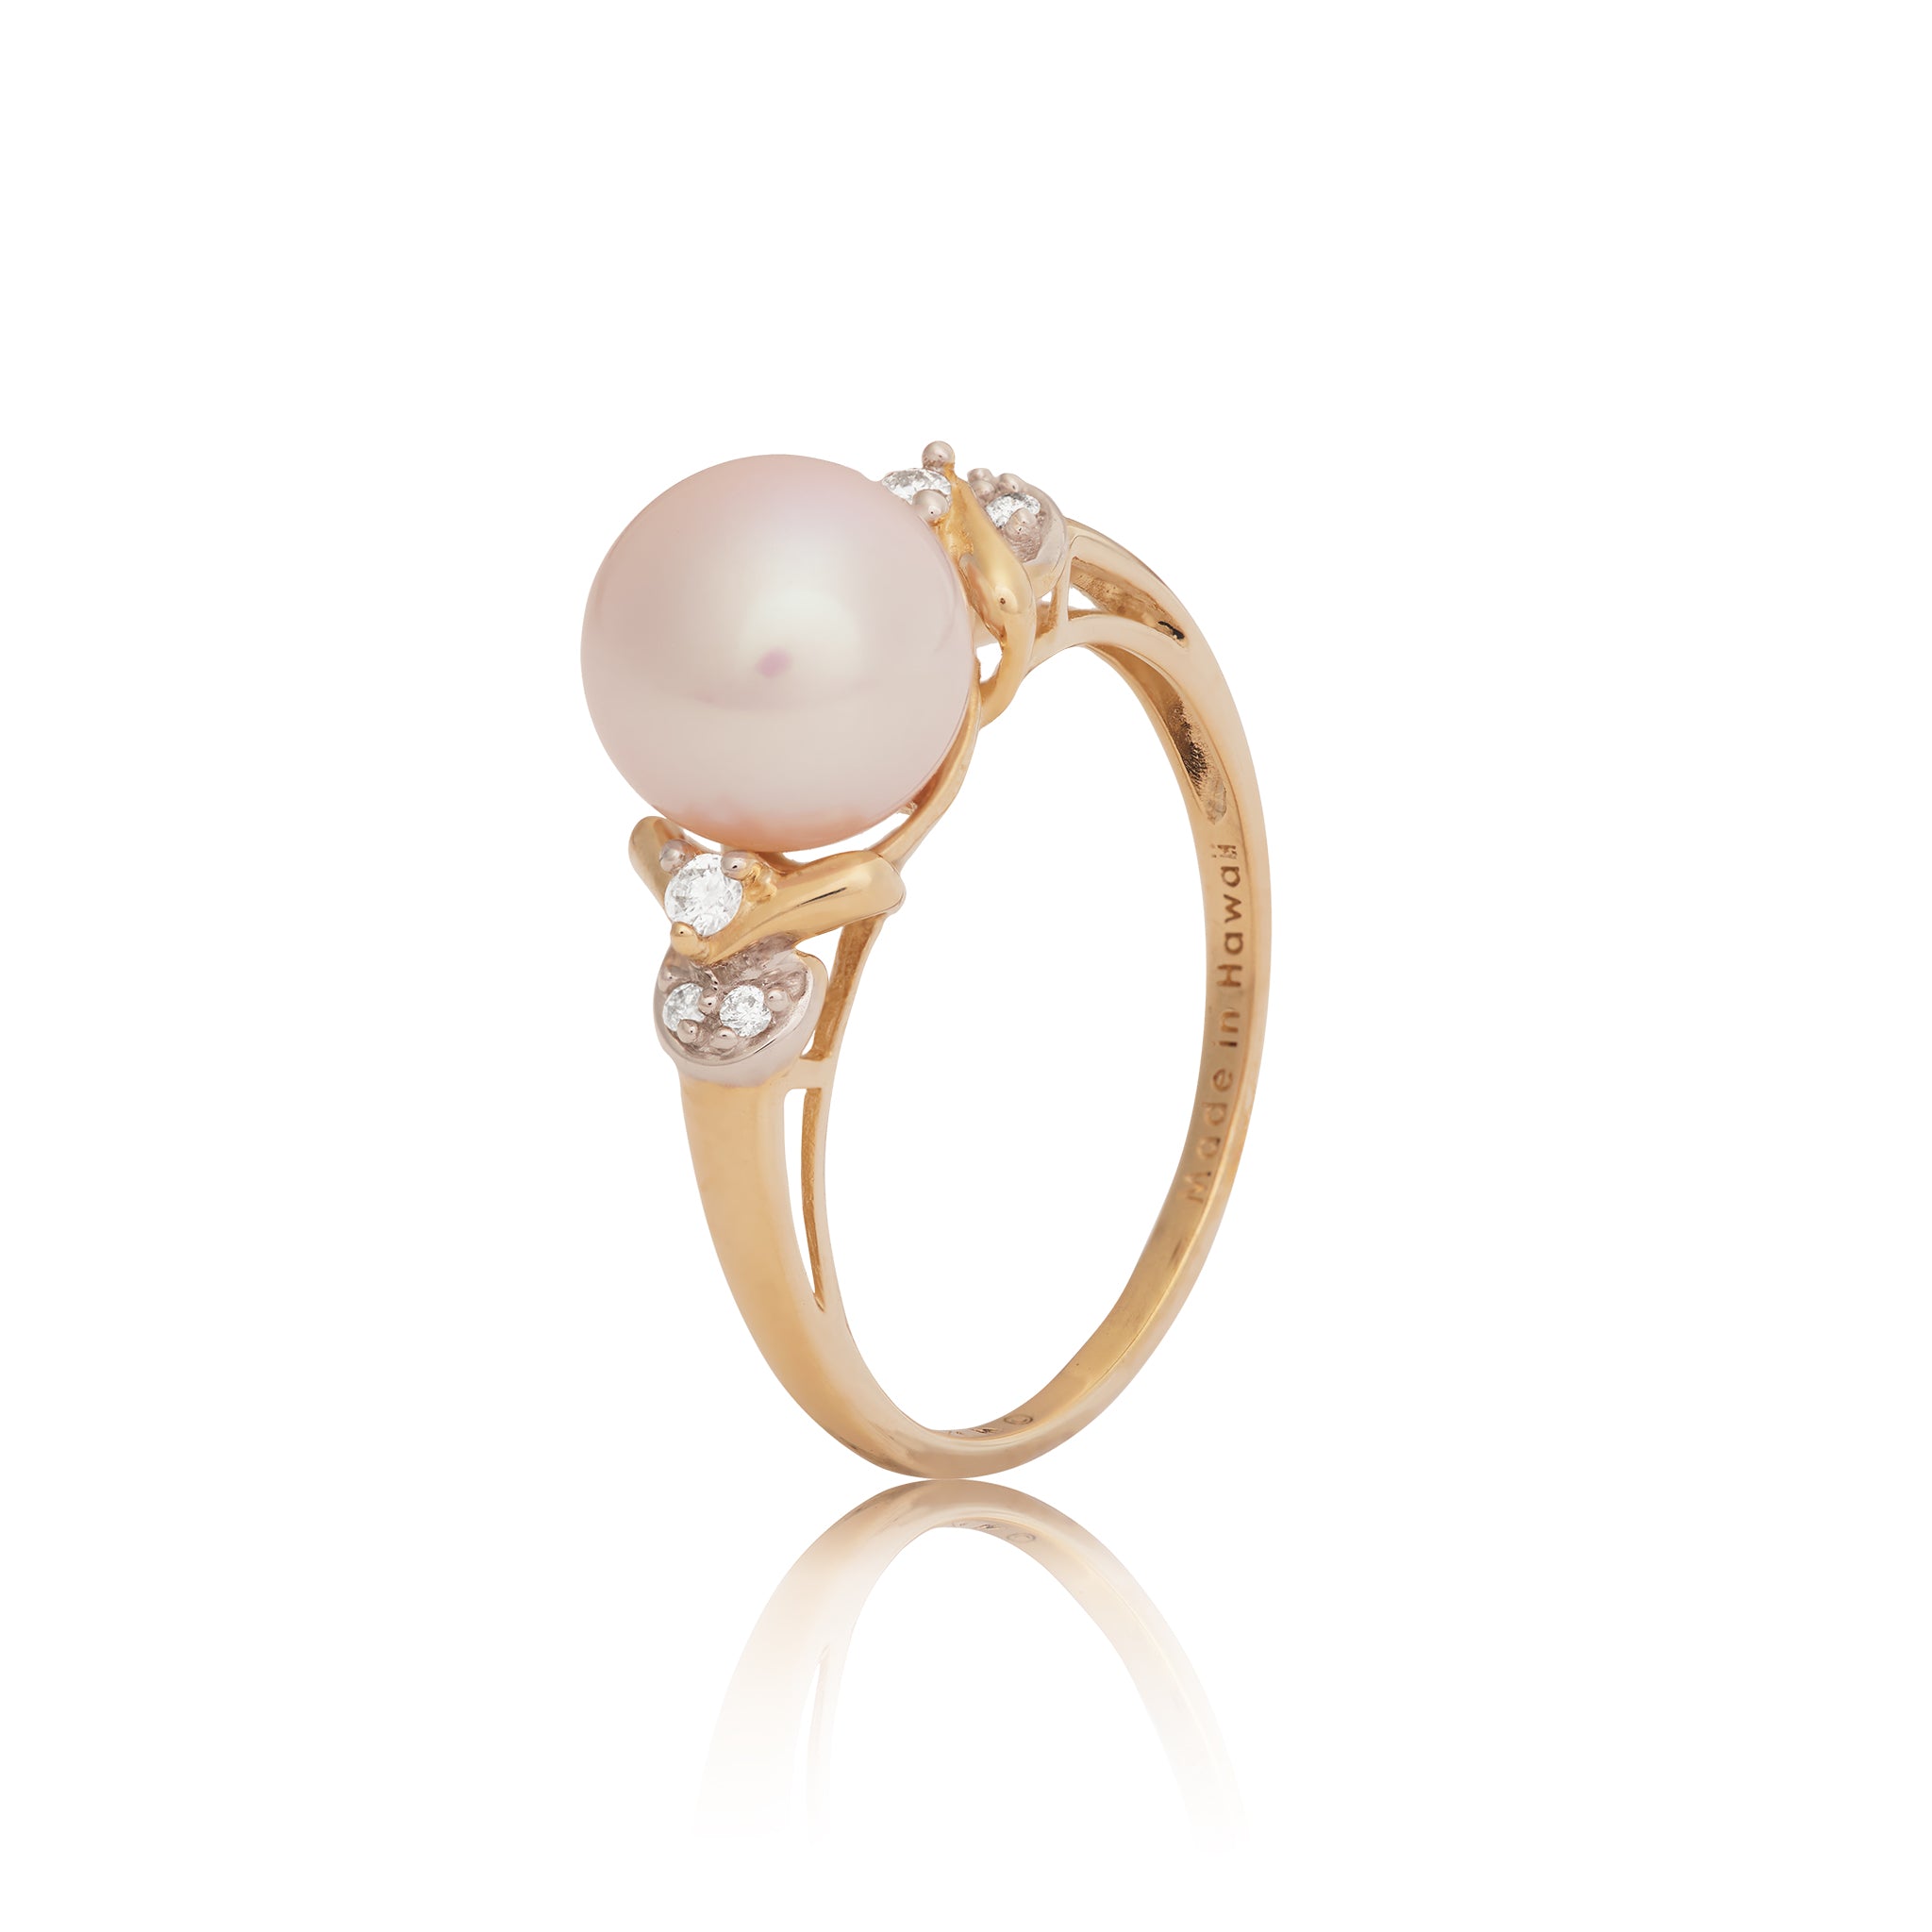 Freshwater White Pearl Ring in Gold with Diamonds - 8-9mm